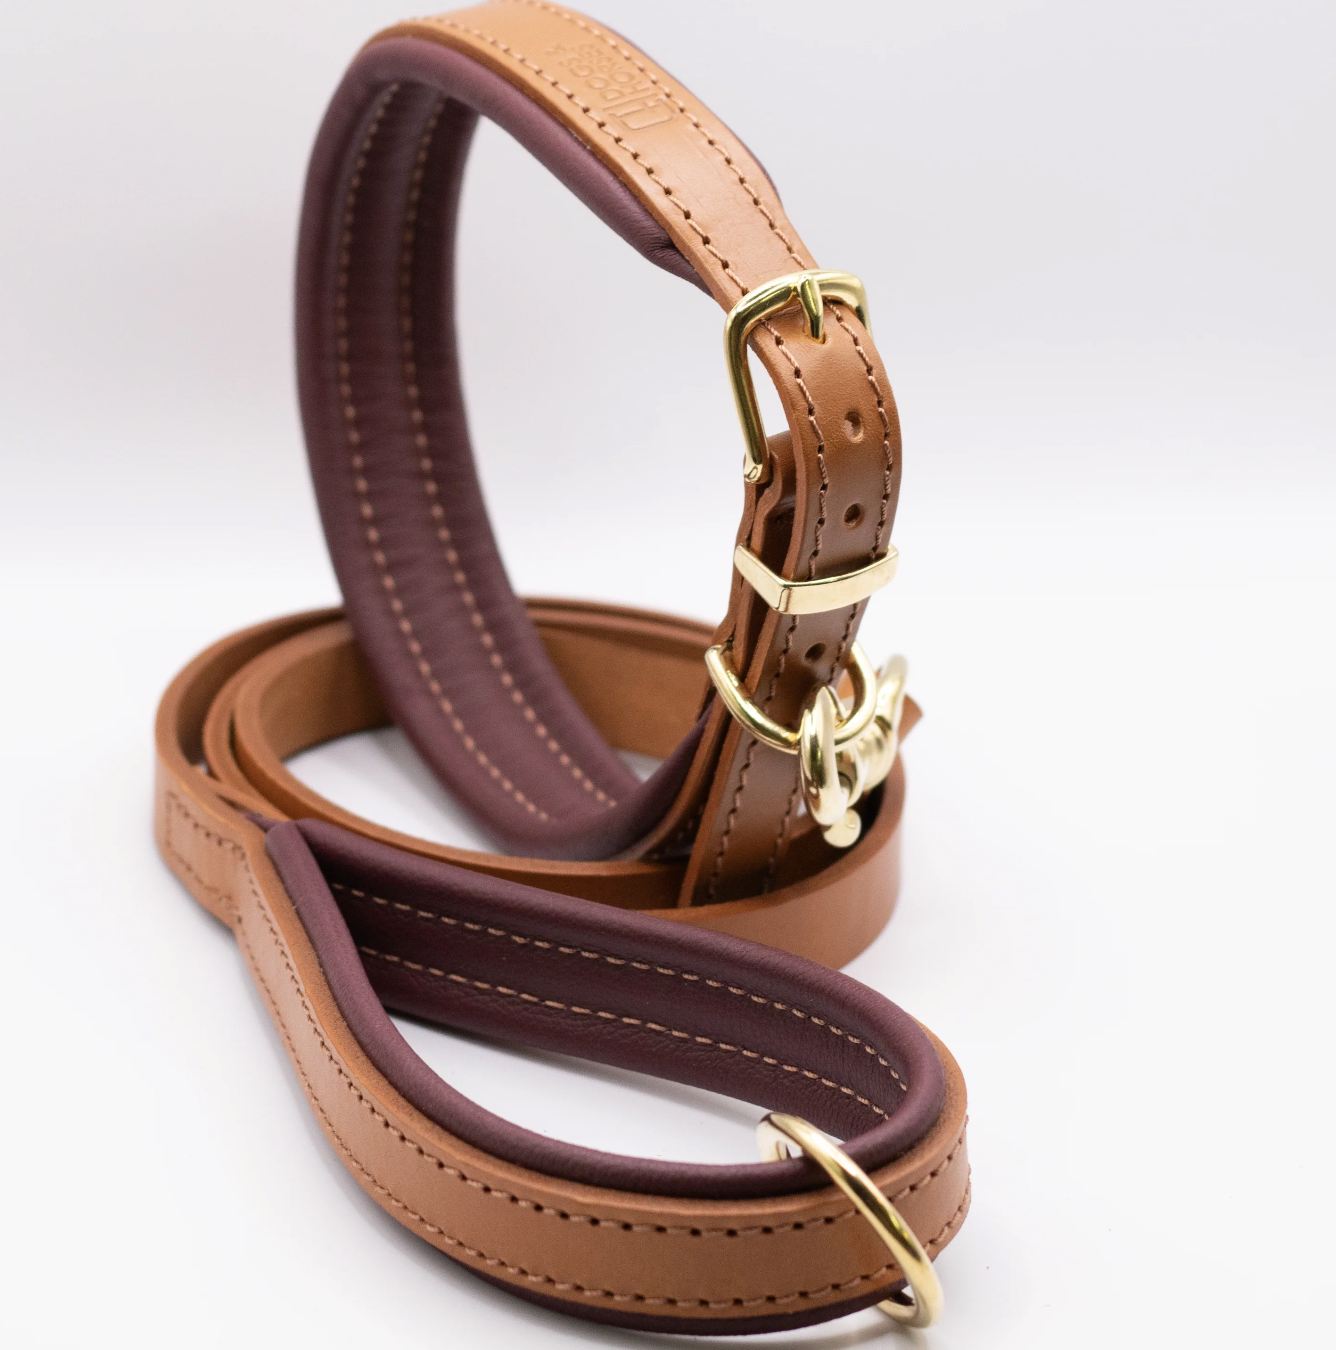 Padded Leather Dog Collar and Lead Set Tan and Merlot